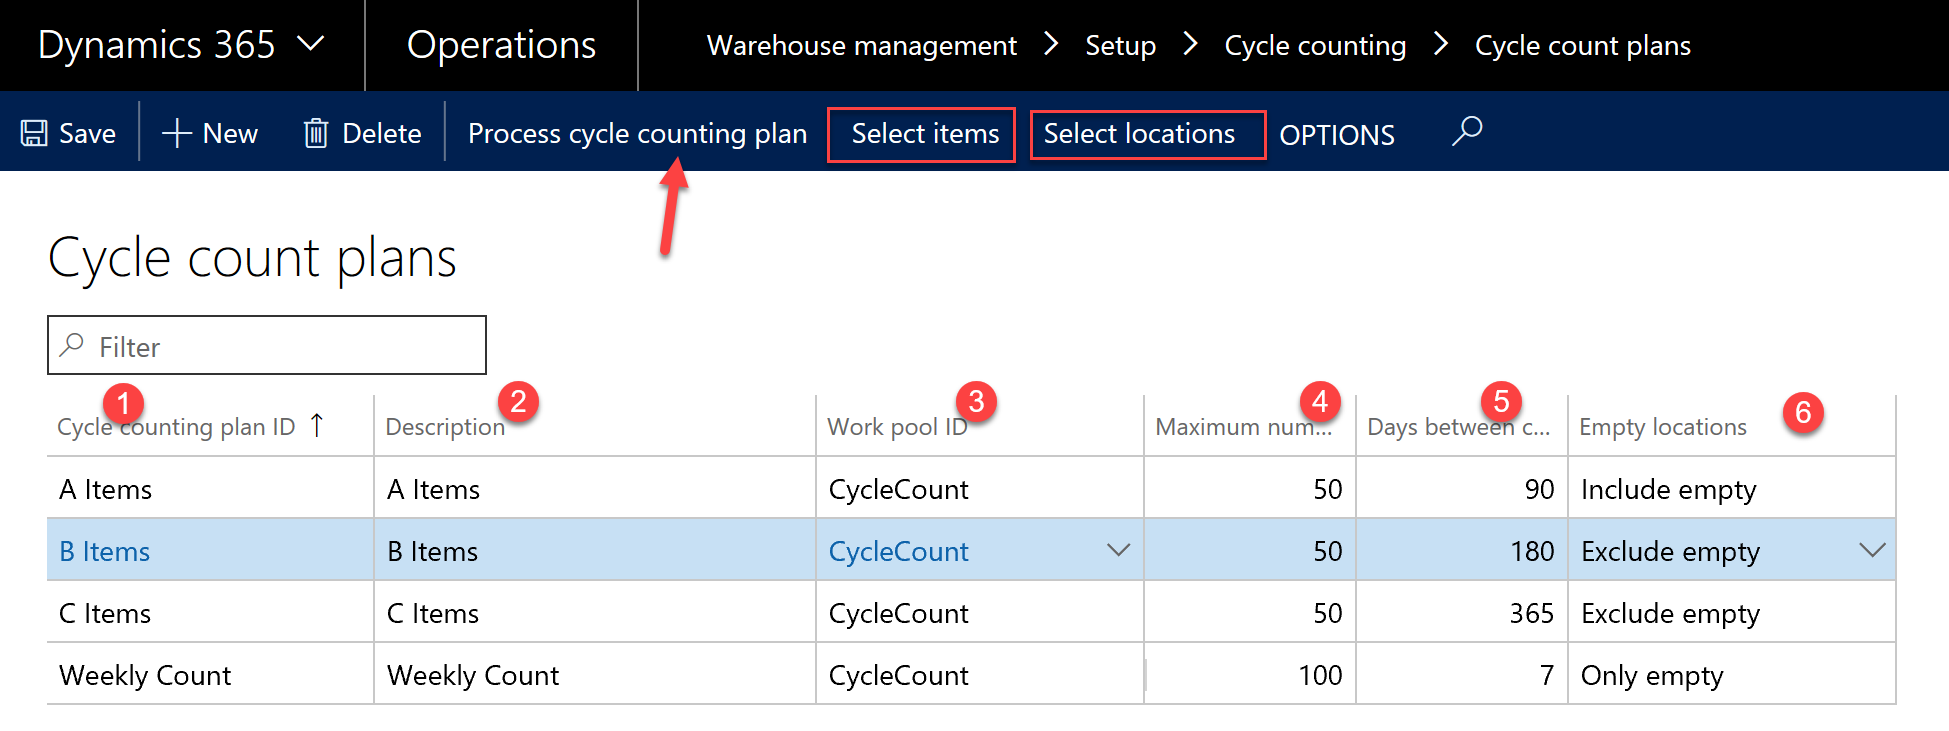 D365  Cycle count plans screenshot